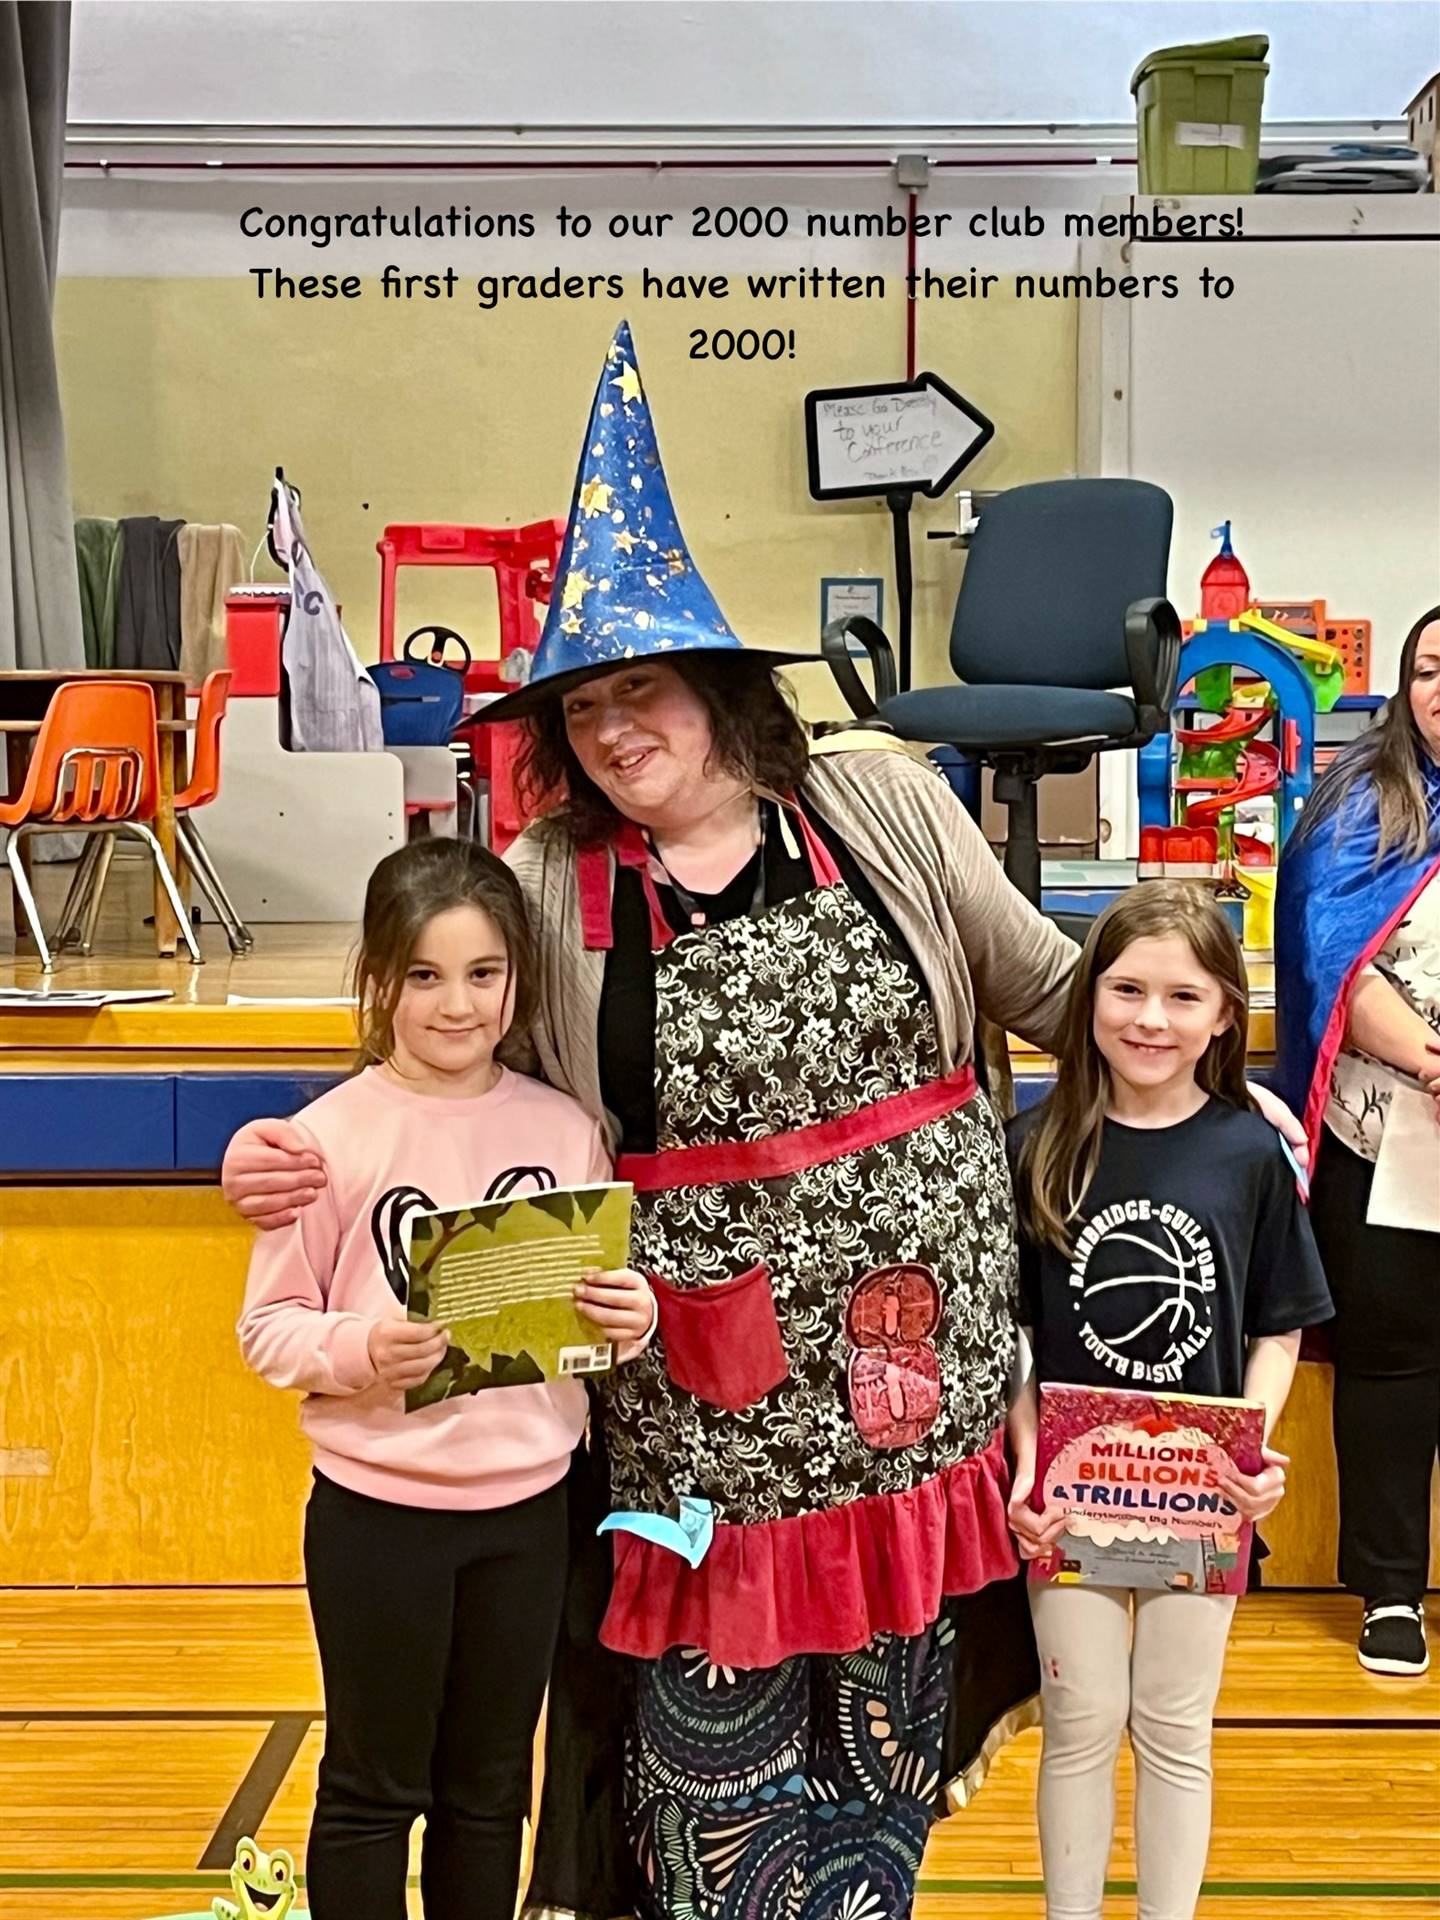 adult dressed as a wizard standing between 2 students